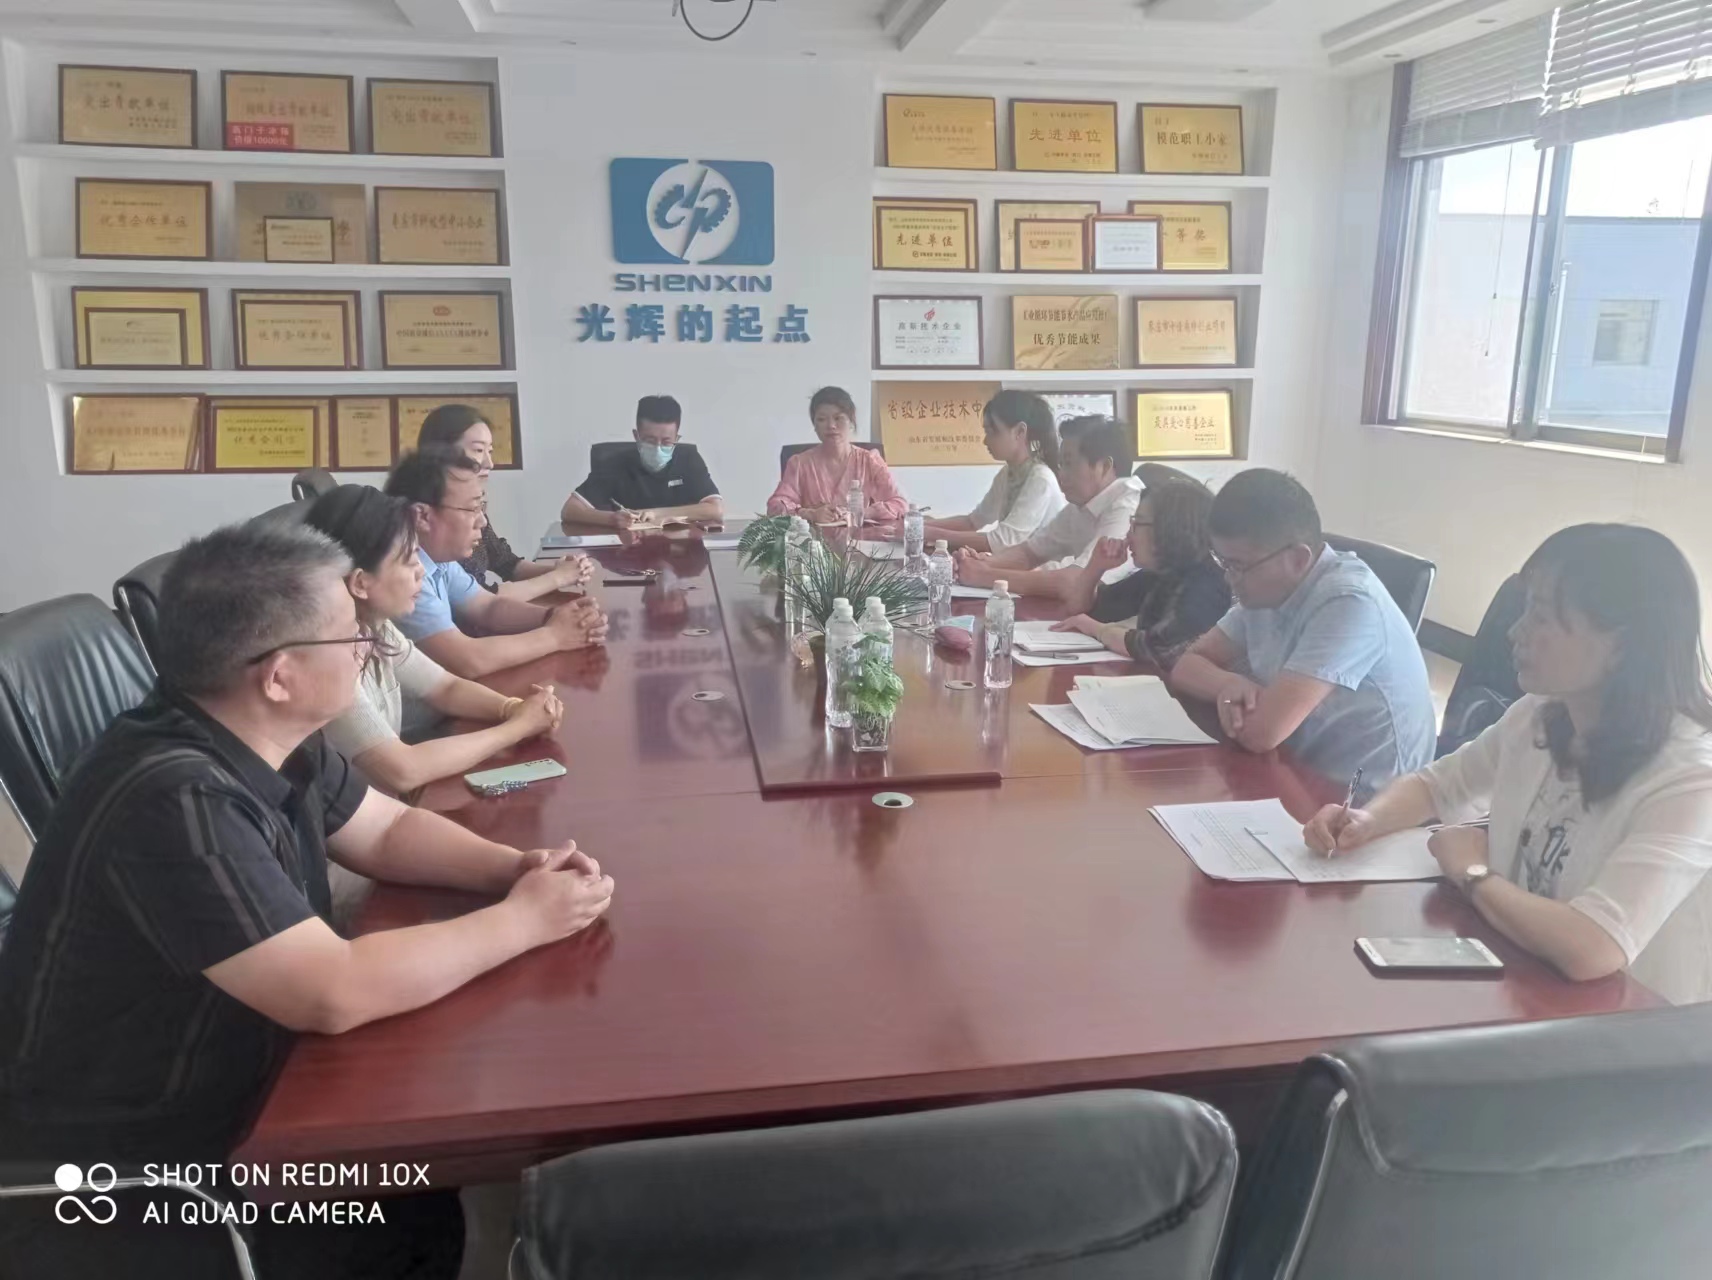 The leaders of Zaozhuang Municipal Bureau of Statistics come to our company to investigate the pilot work of the research and development of electronic accounts